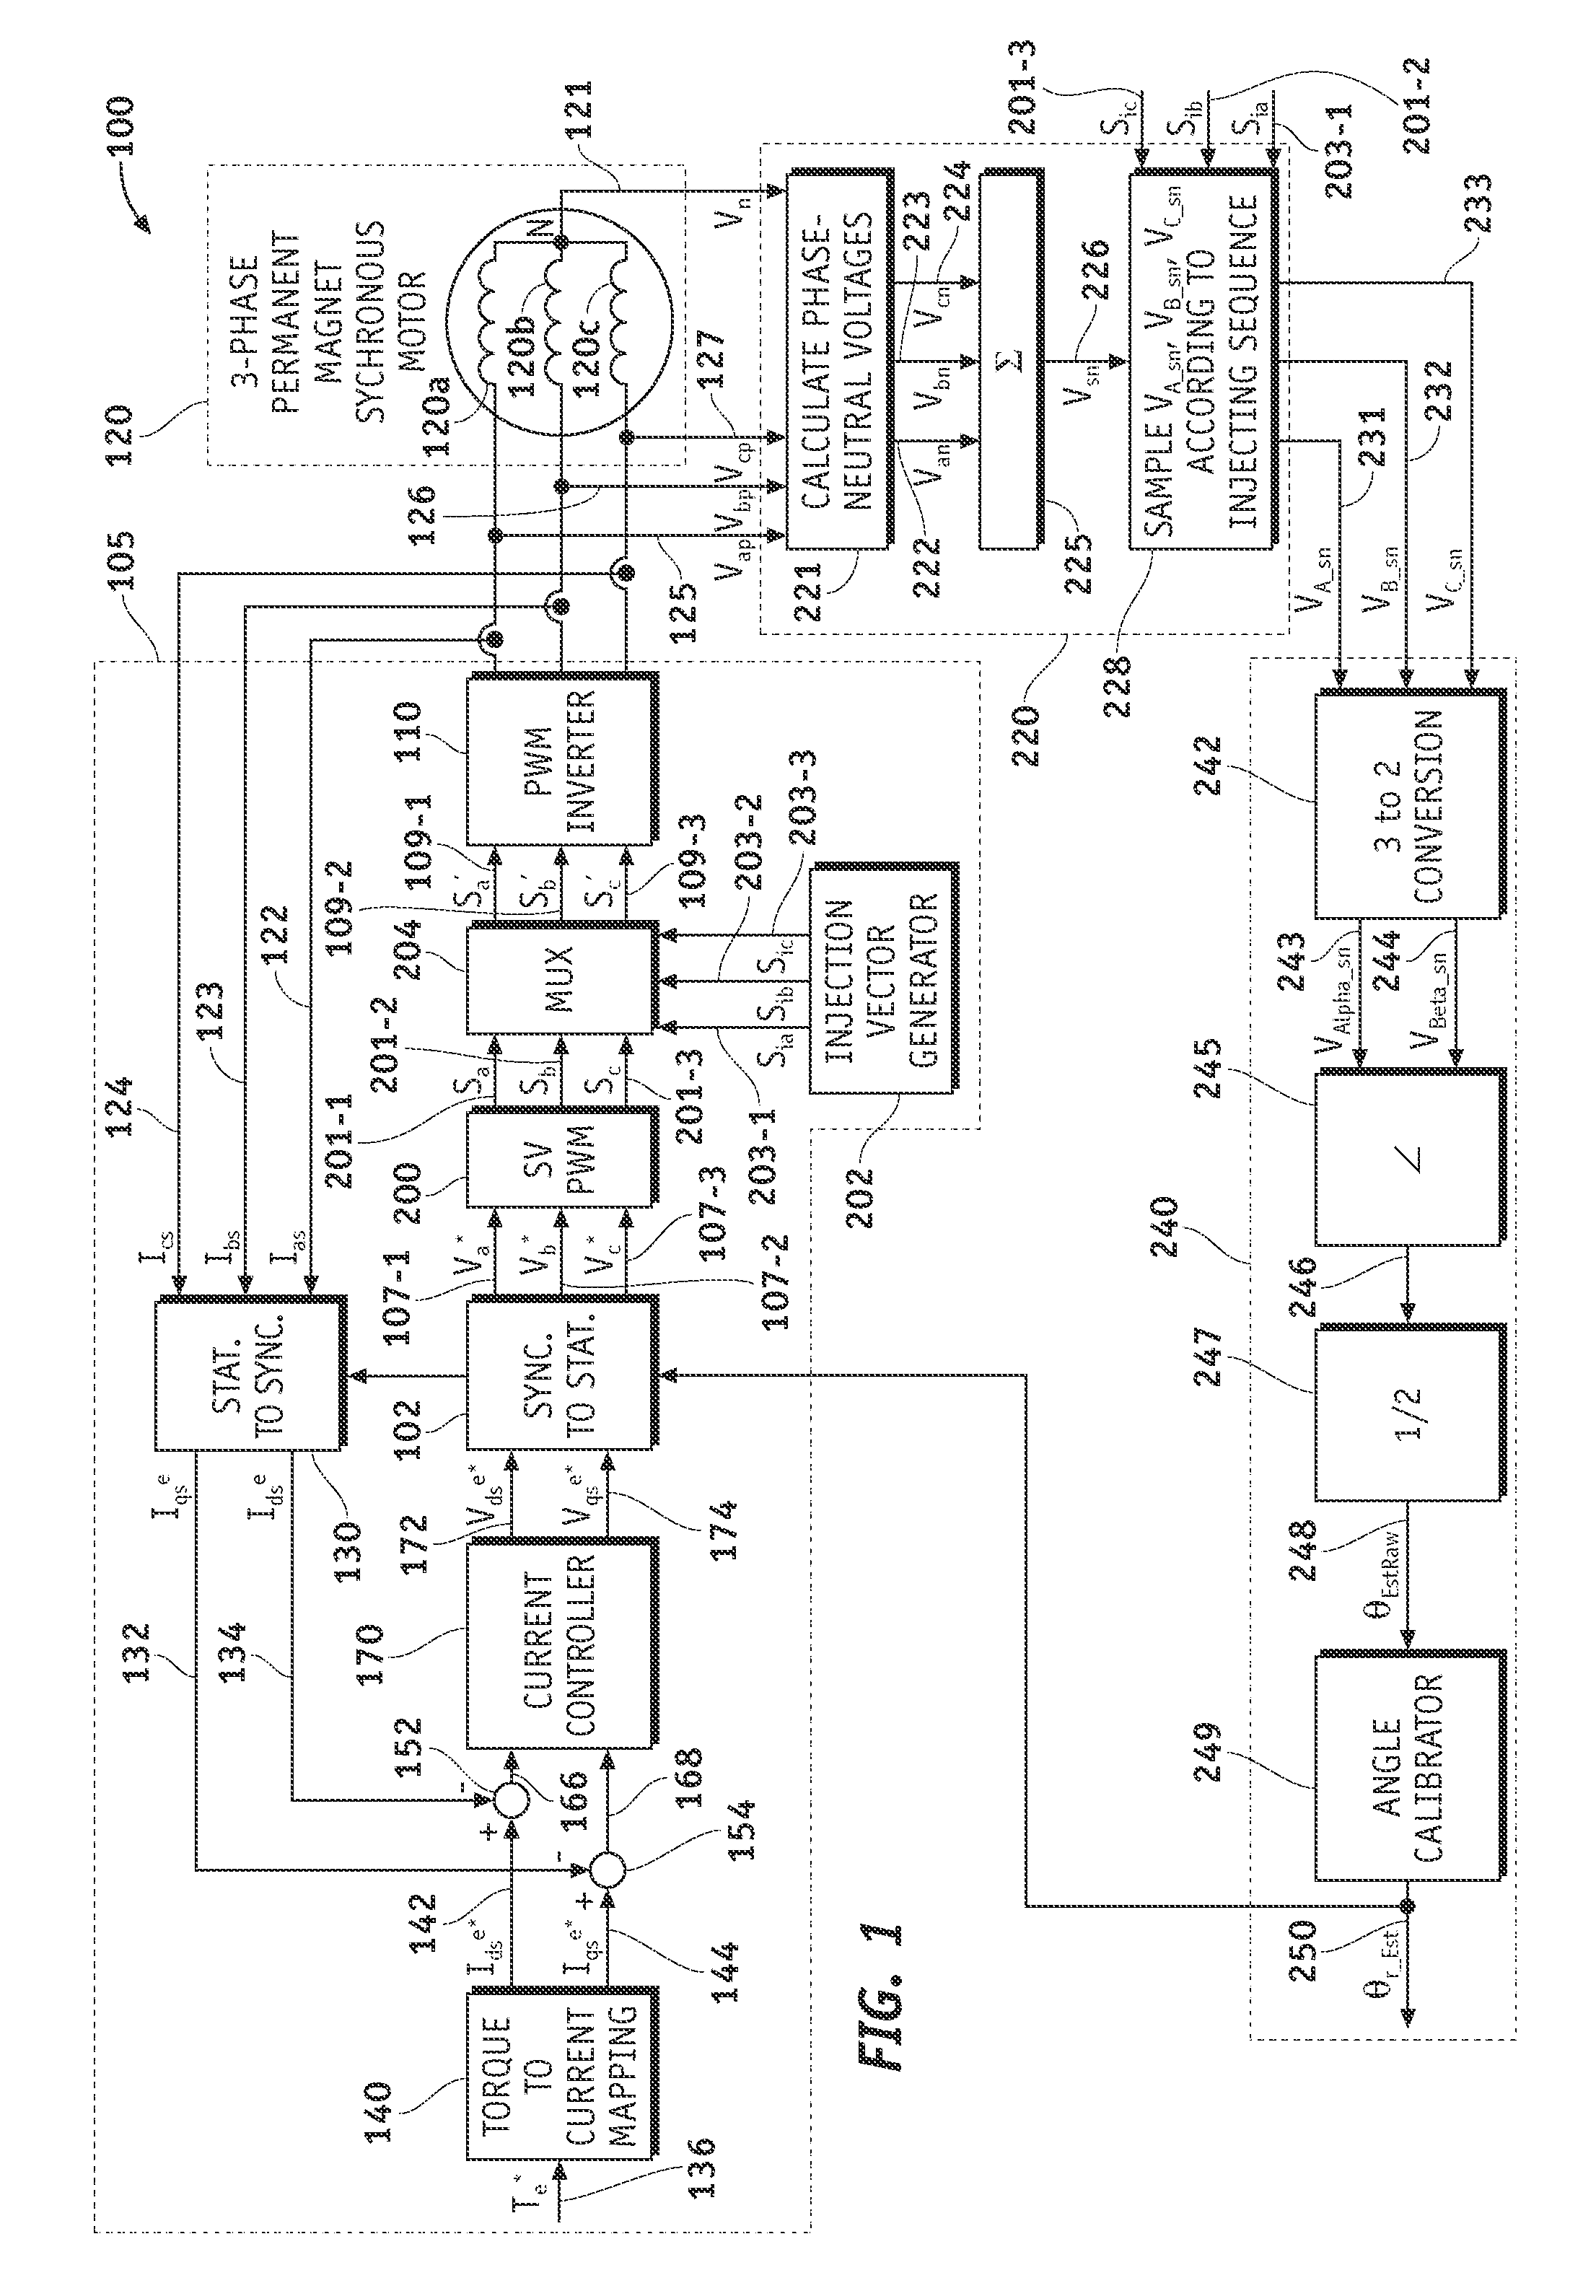 Methods, systems and apparatus for sensorless rotor angular position estimation implementing reduced switching loss pulse width modulated (PWM) waveforms